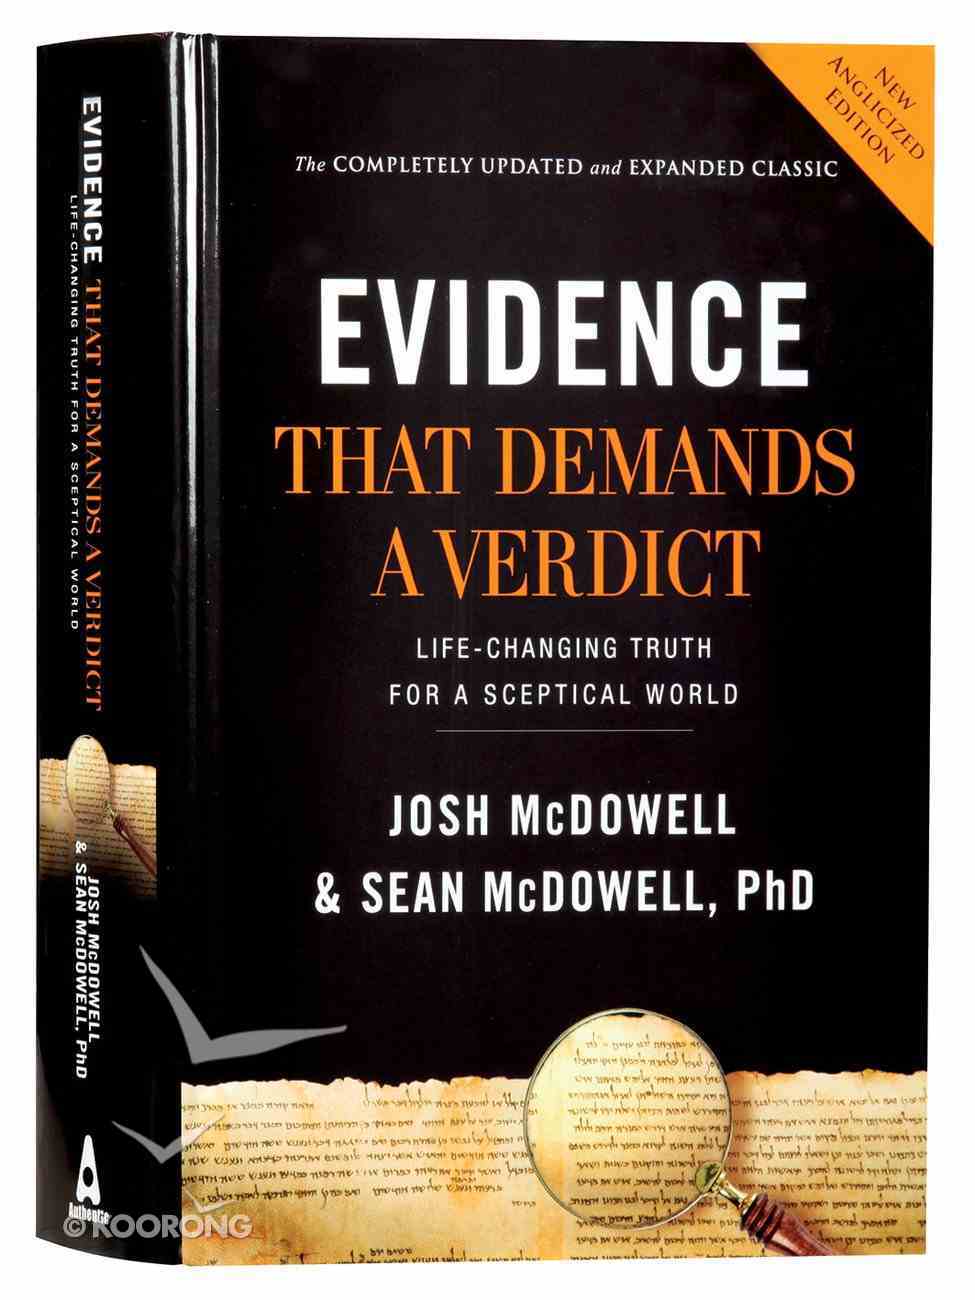 Evidence That Demands a Verdict: Life-Changing Truth For a Skeptical World (Completely And Expanded) Hardback